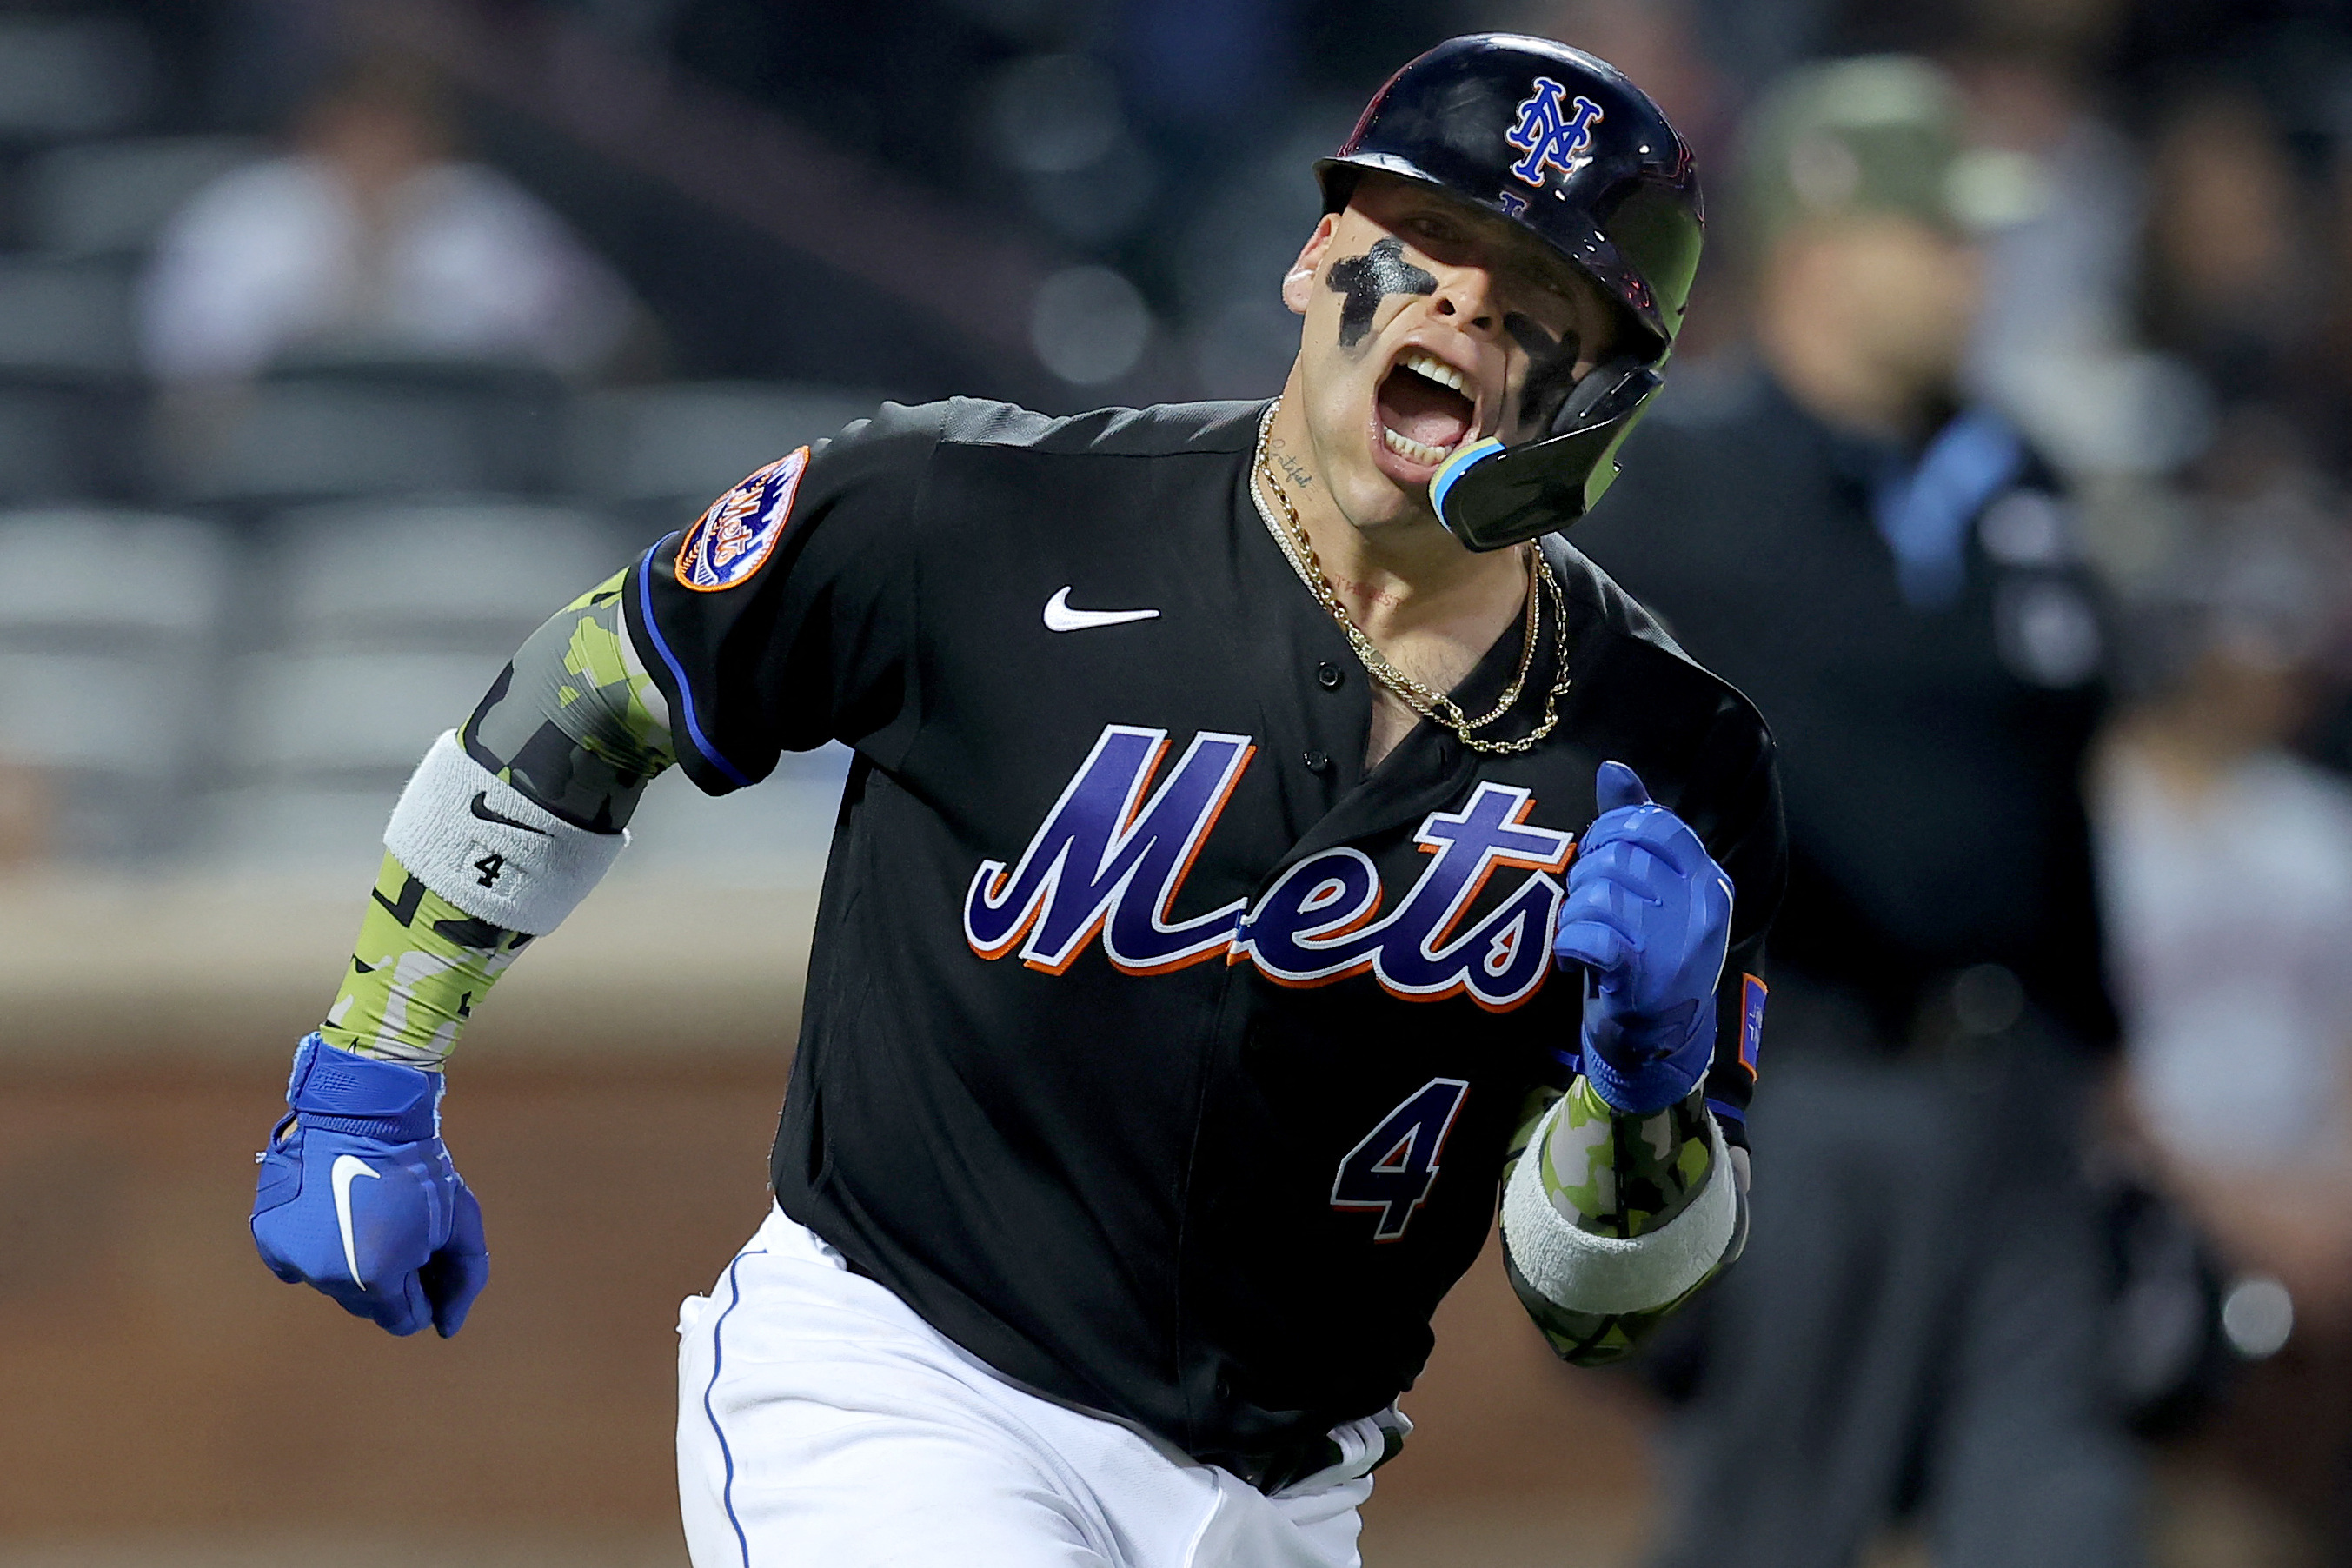 Mets rally multiple times to outlast Guardians 10-9